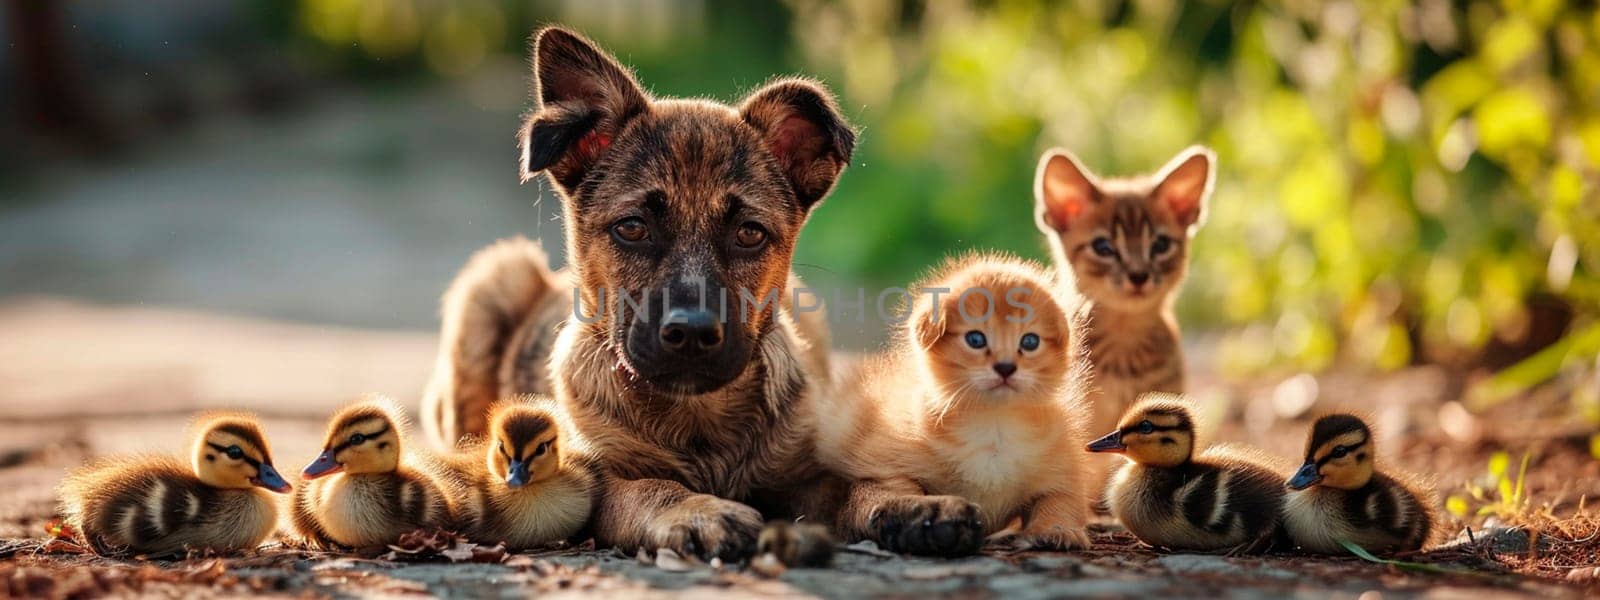 Dog with ducklings in the yard. Selective focus. by yanadjana